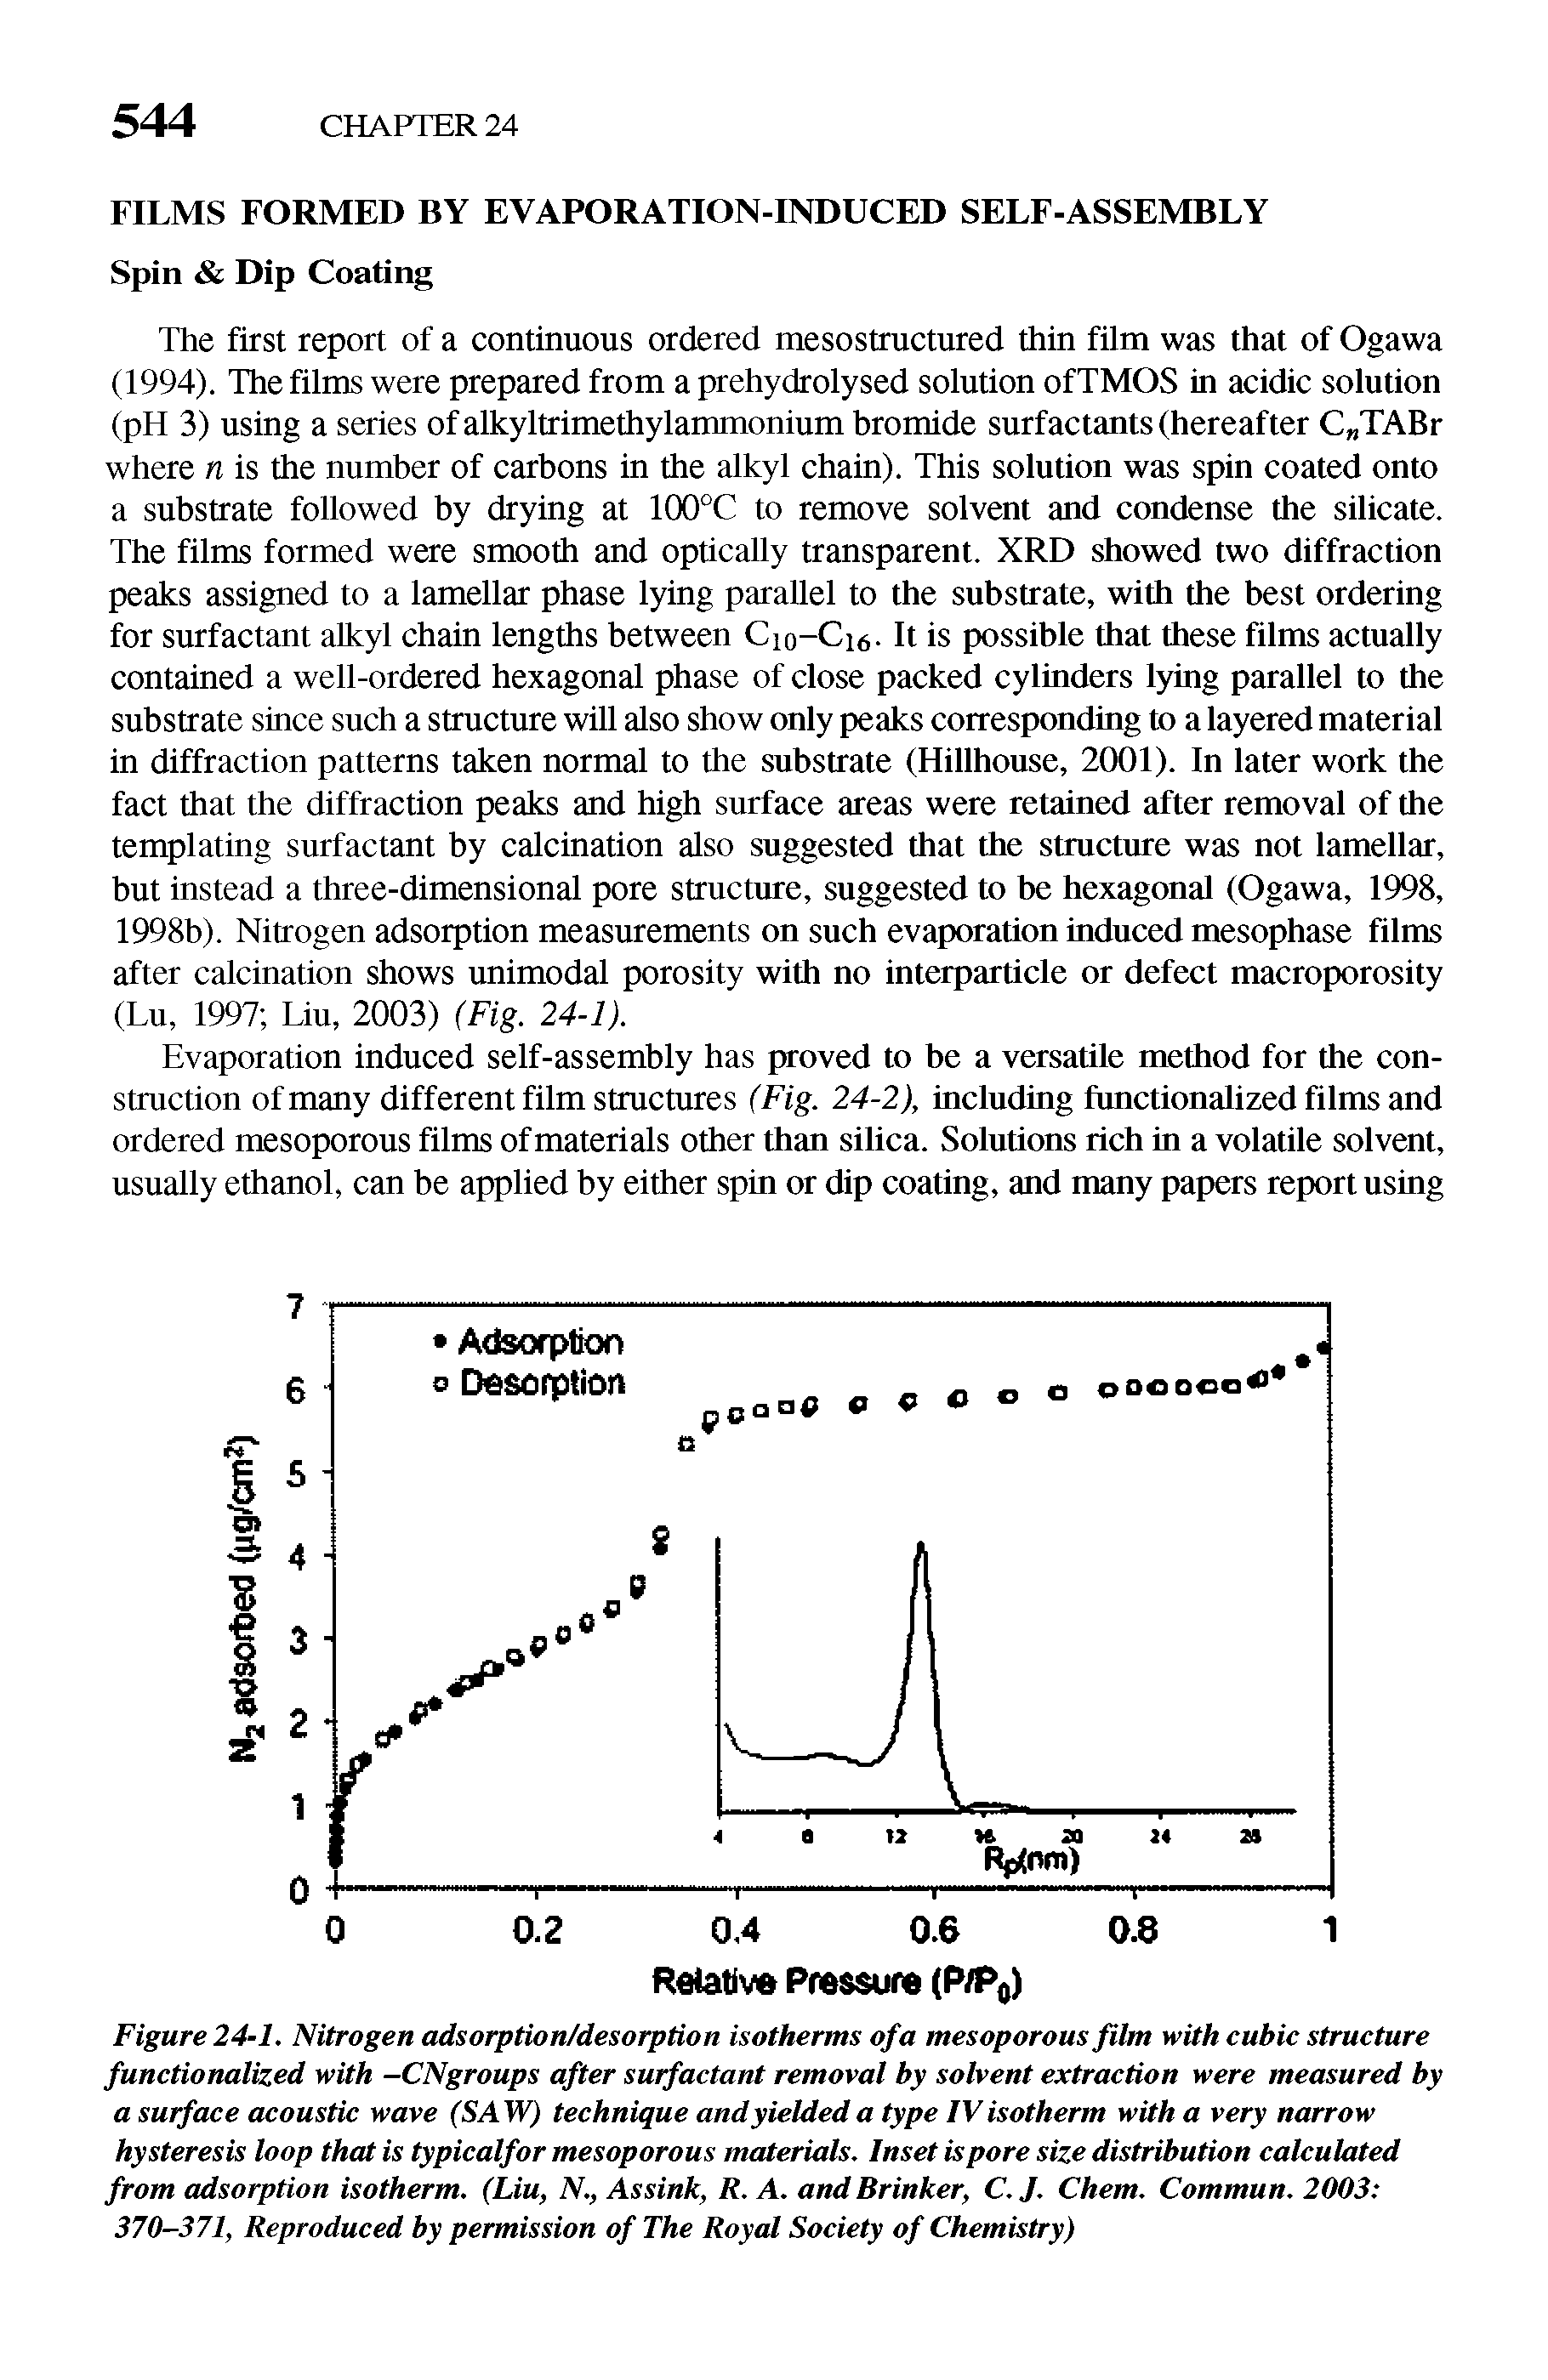 Figure 24-1. Nitrogen adsorption/desorption isotherms of a mesoporous film with cubic structure functionalized with -CNgroups after surfactant removal by solvent extraction were measured by a surface acoustic wave (SAW) technique andyieldeda type IVisotherm with a very narrow hysteresis loop that is typicalfor mesoporous materials. Inset is pore size distribution calculated from adsorption isotherm. (Liu, N., Assink, R. A. and Brinker, C. J. Chem. Commun. 2003 370-371, Reproduced by permission of The Royal Society of Chemistry)...